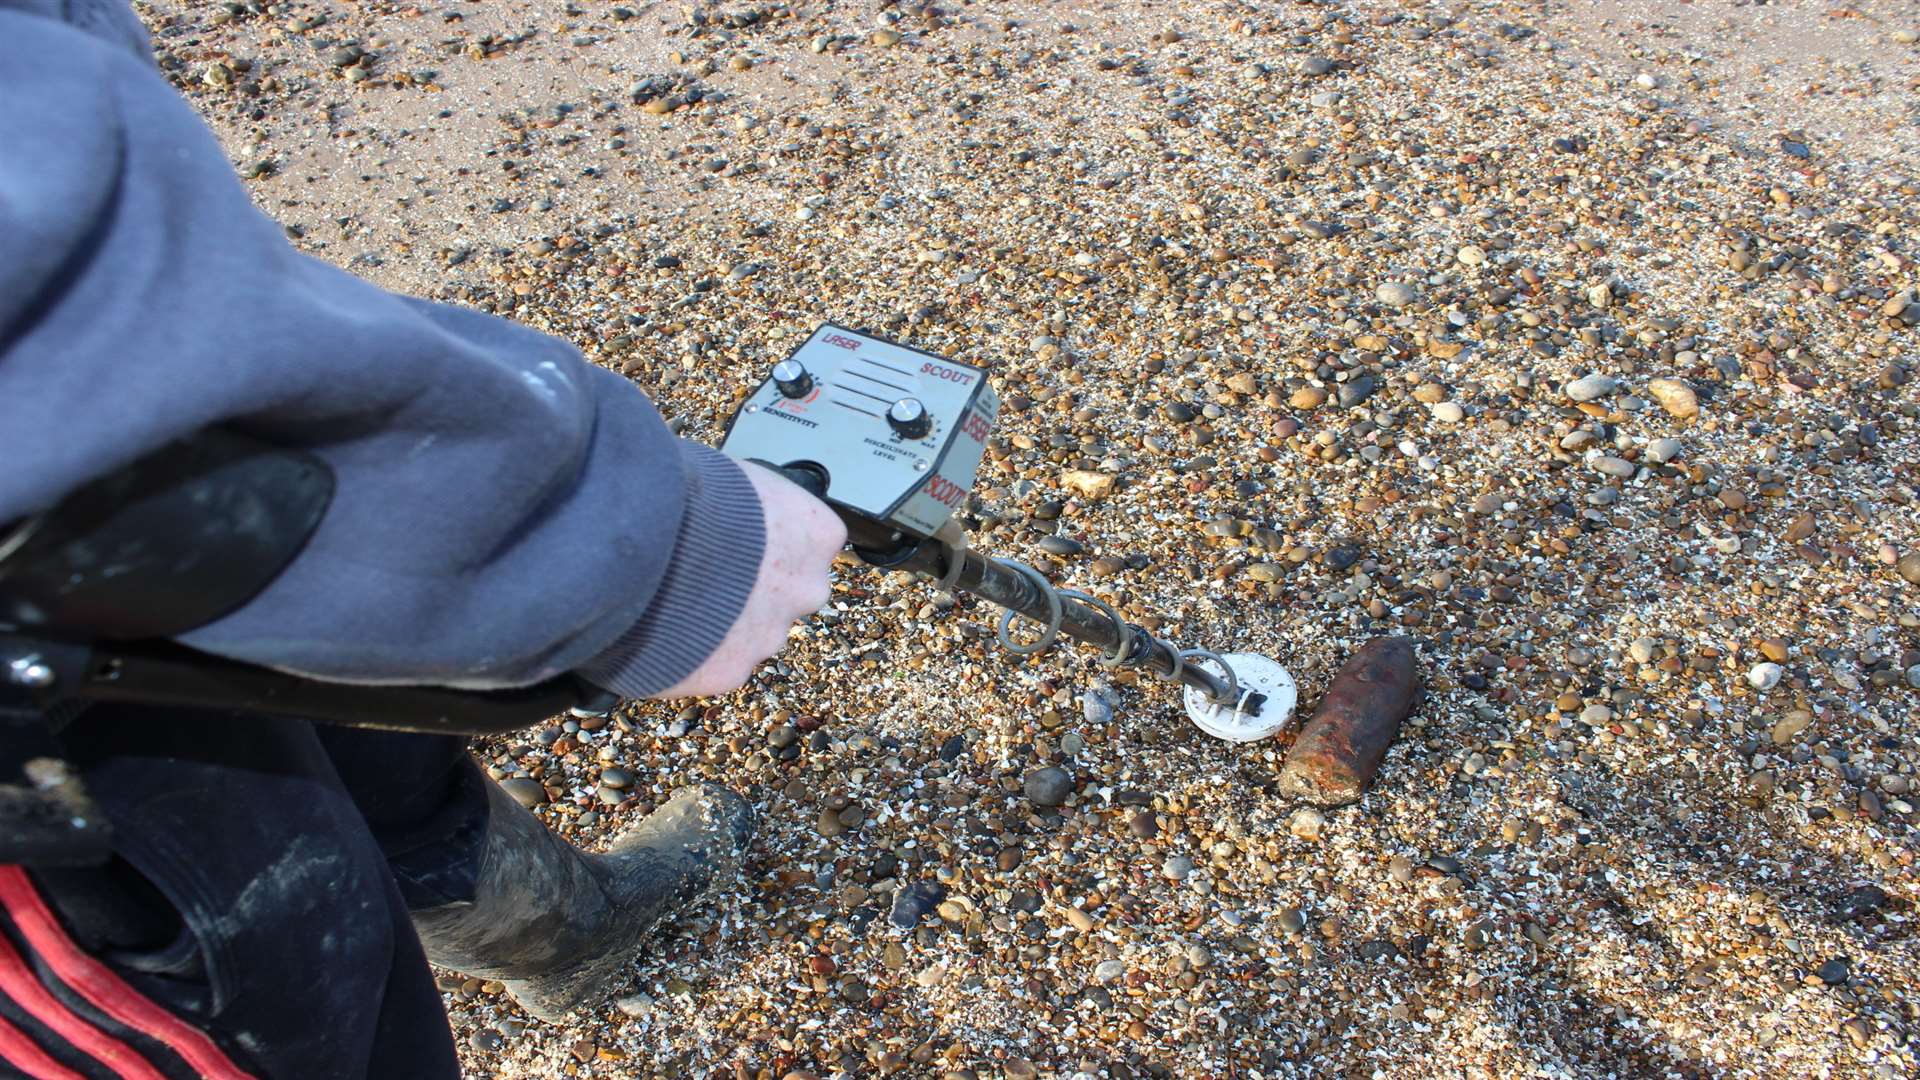 The shell was discovered with Gary Underdown's metal detector